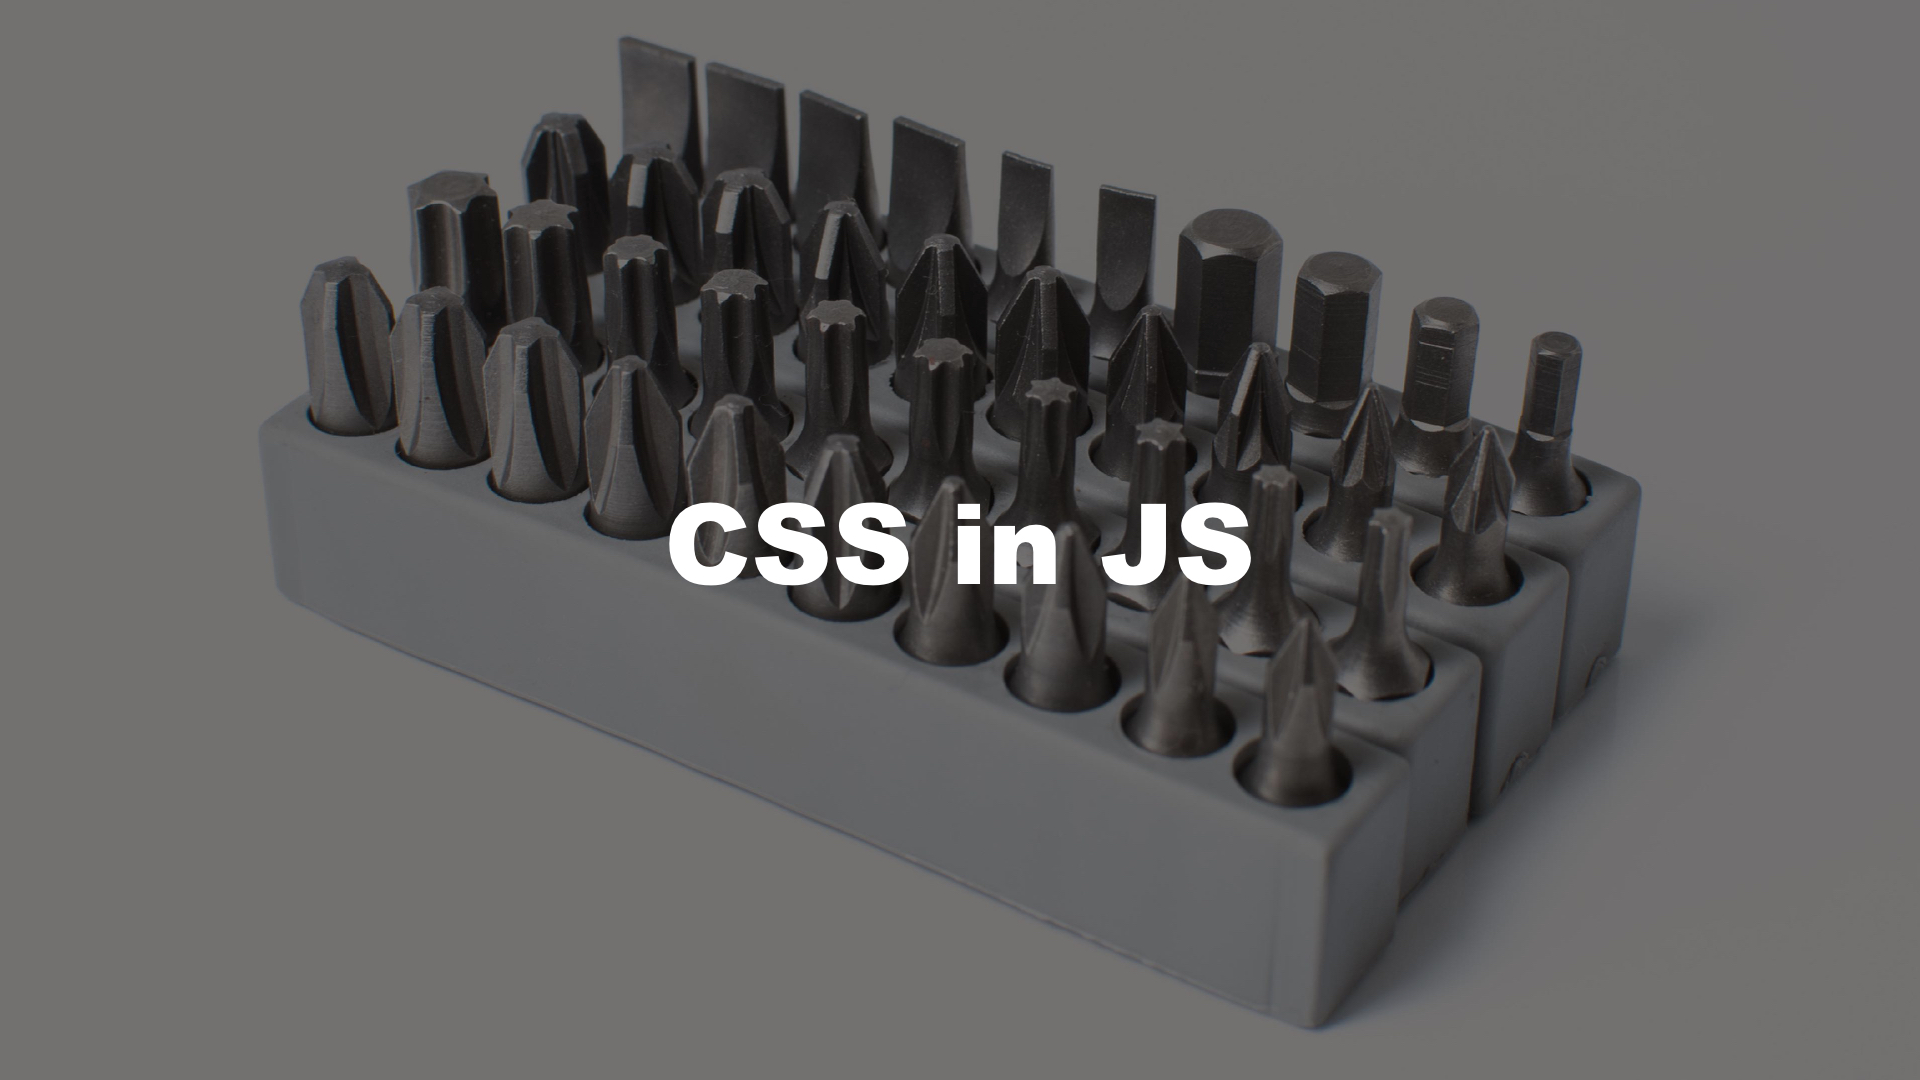 CSS is JS is maturing, and will look more like this pretty soon!